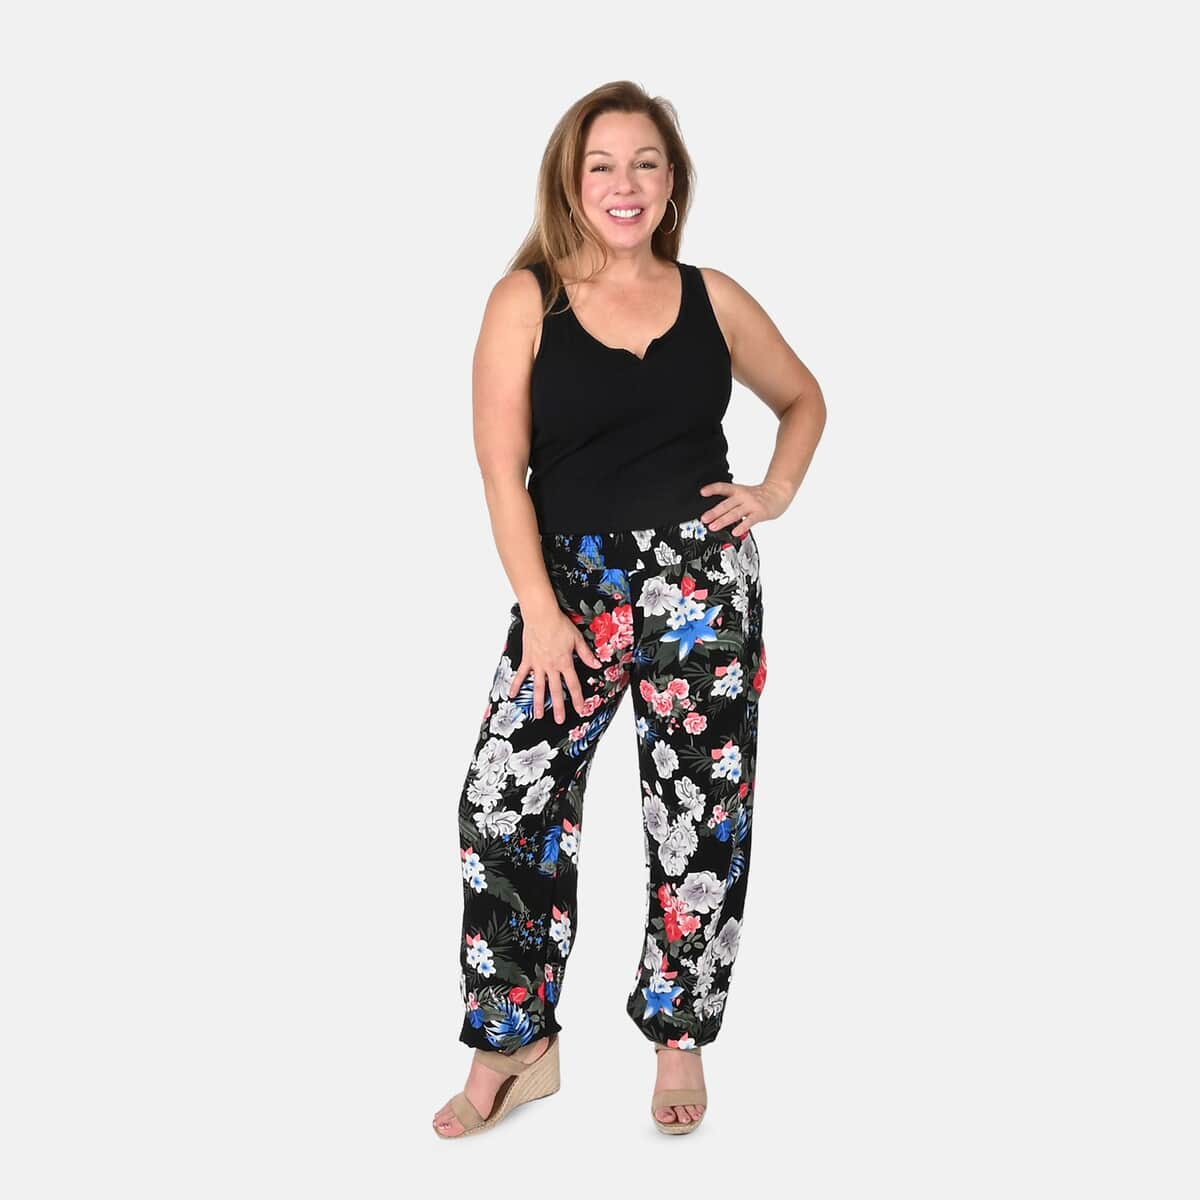 Tamsy Black Rose Smocked Waist Harem Pant with 2 Pockets - One Size Fits Most image number 0